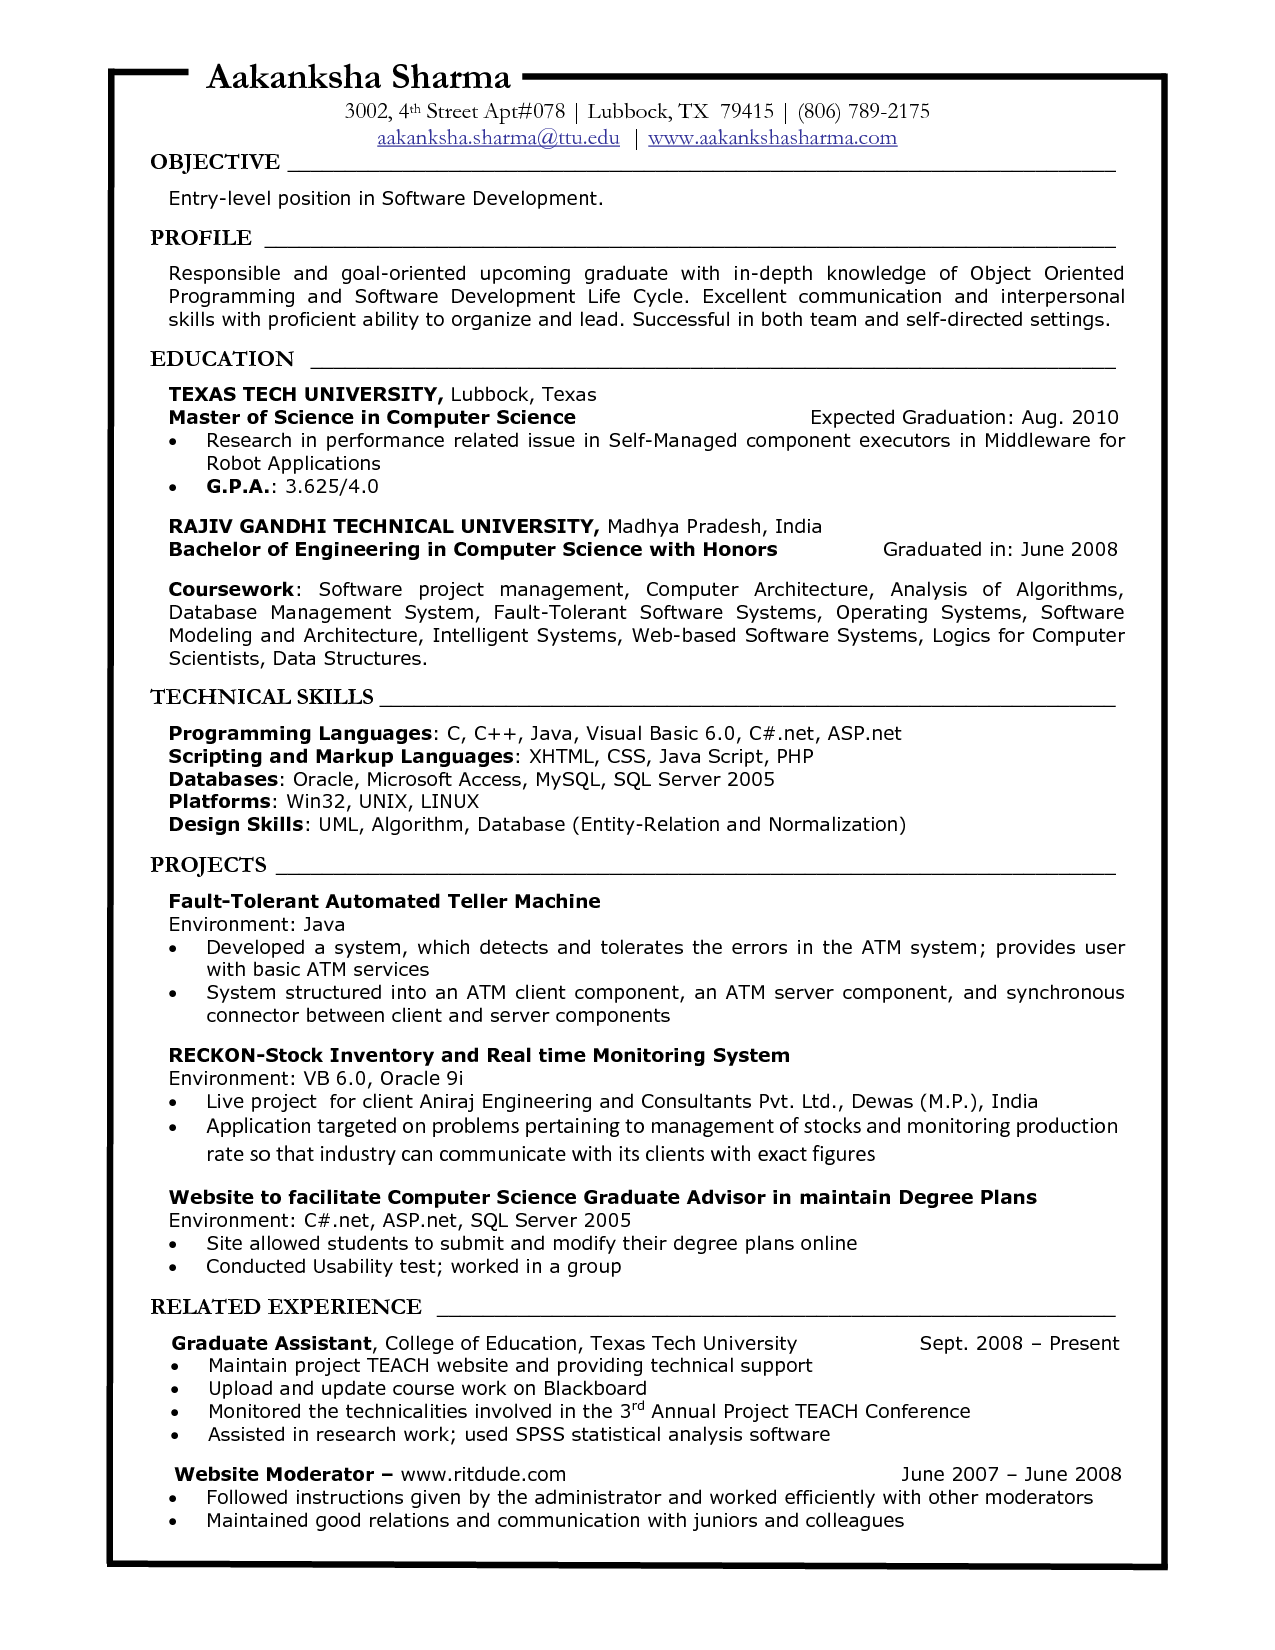 Science Resume Entry Lev Computer Science Entry Level Resume 